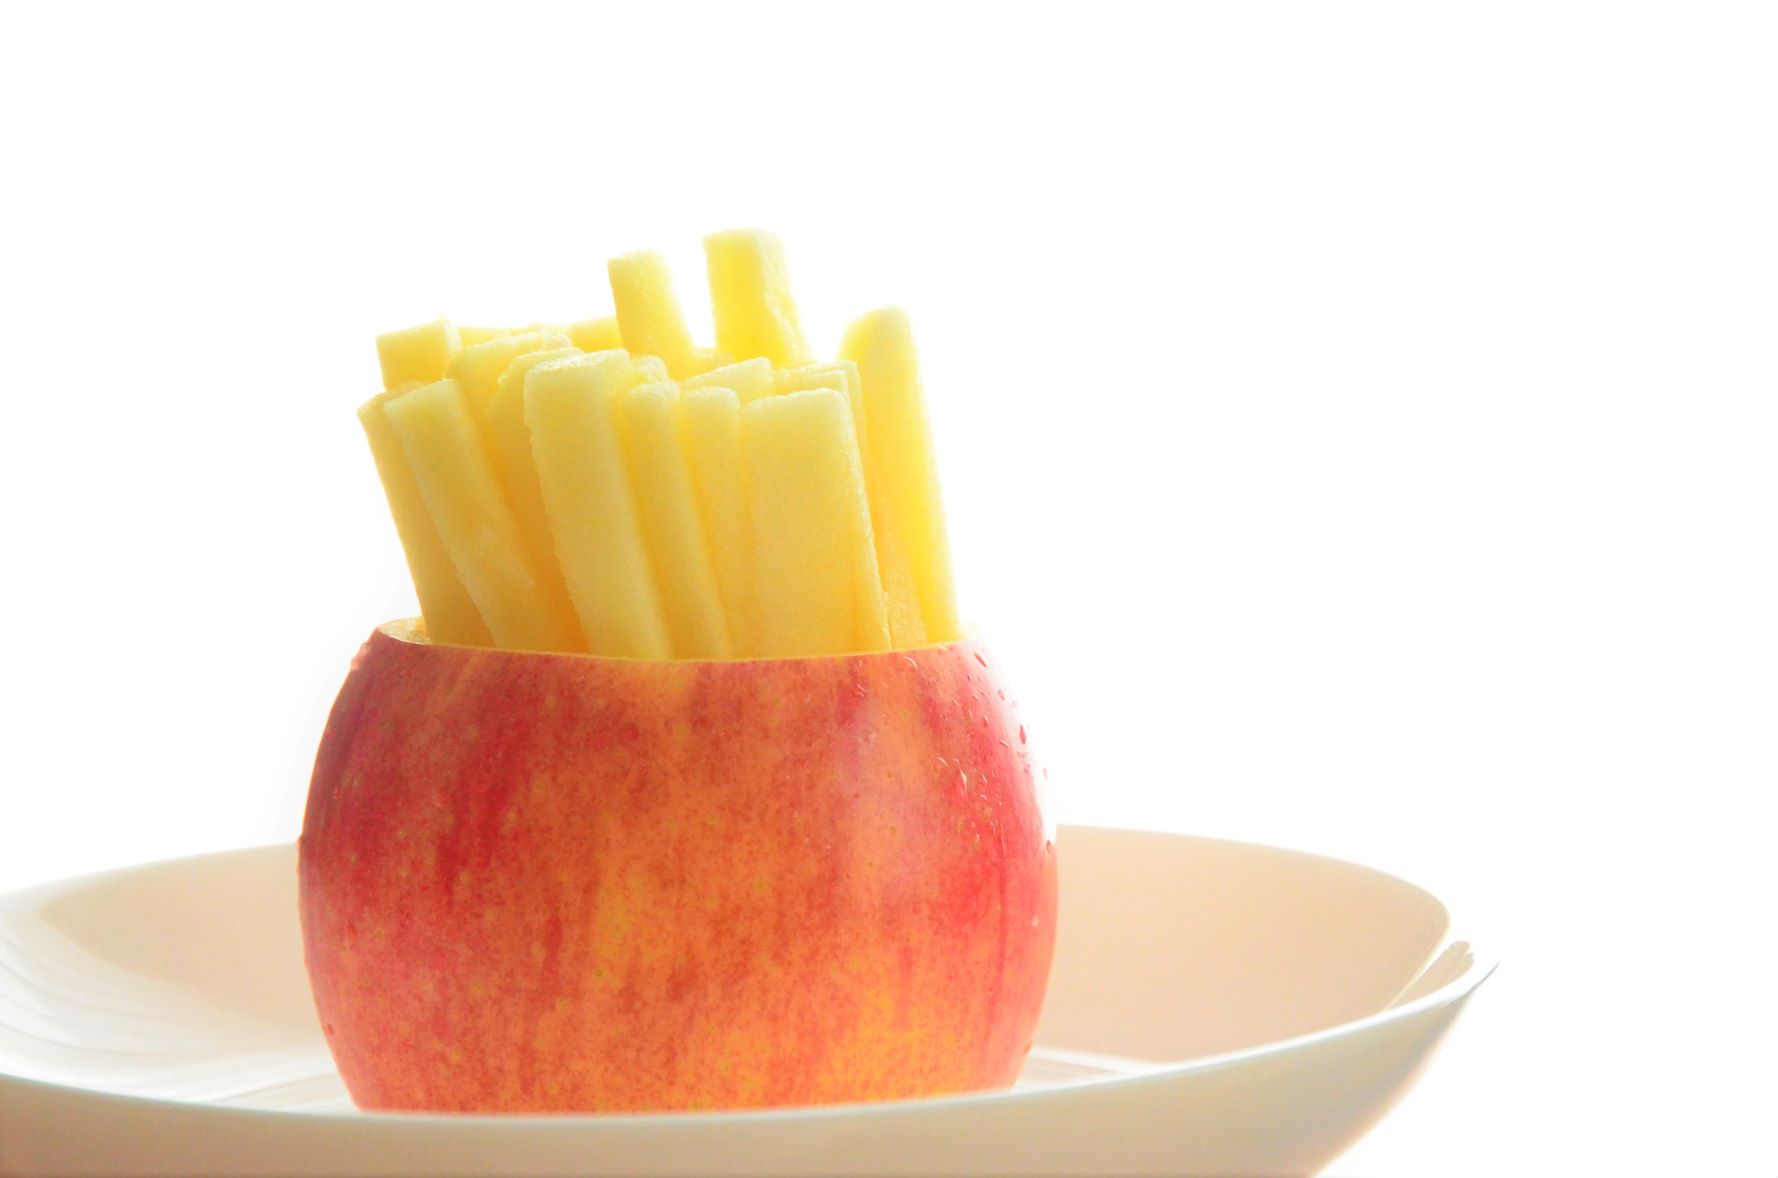 French fries? No. It's an apple.